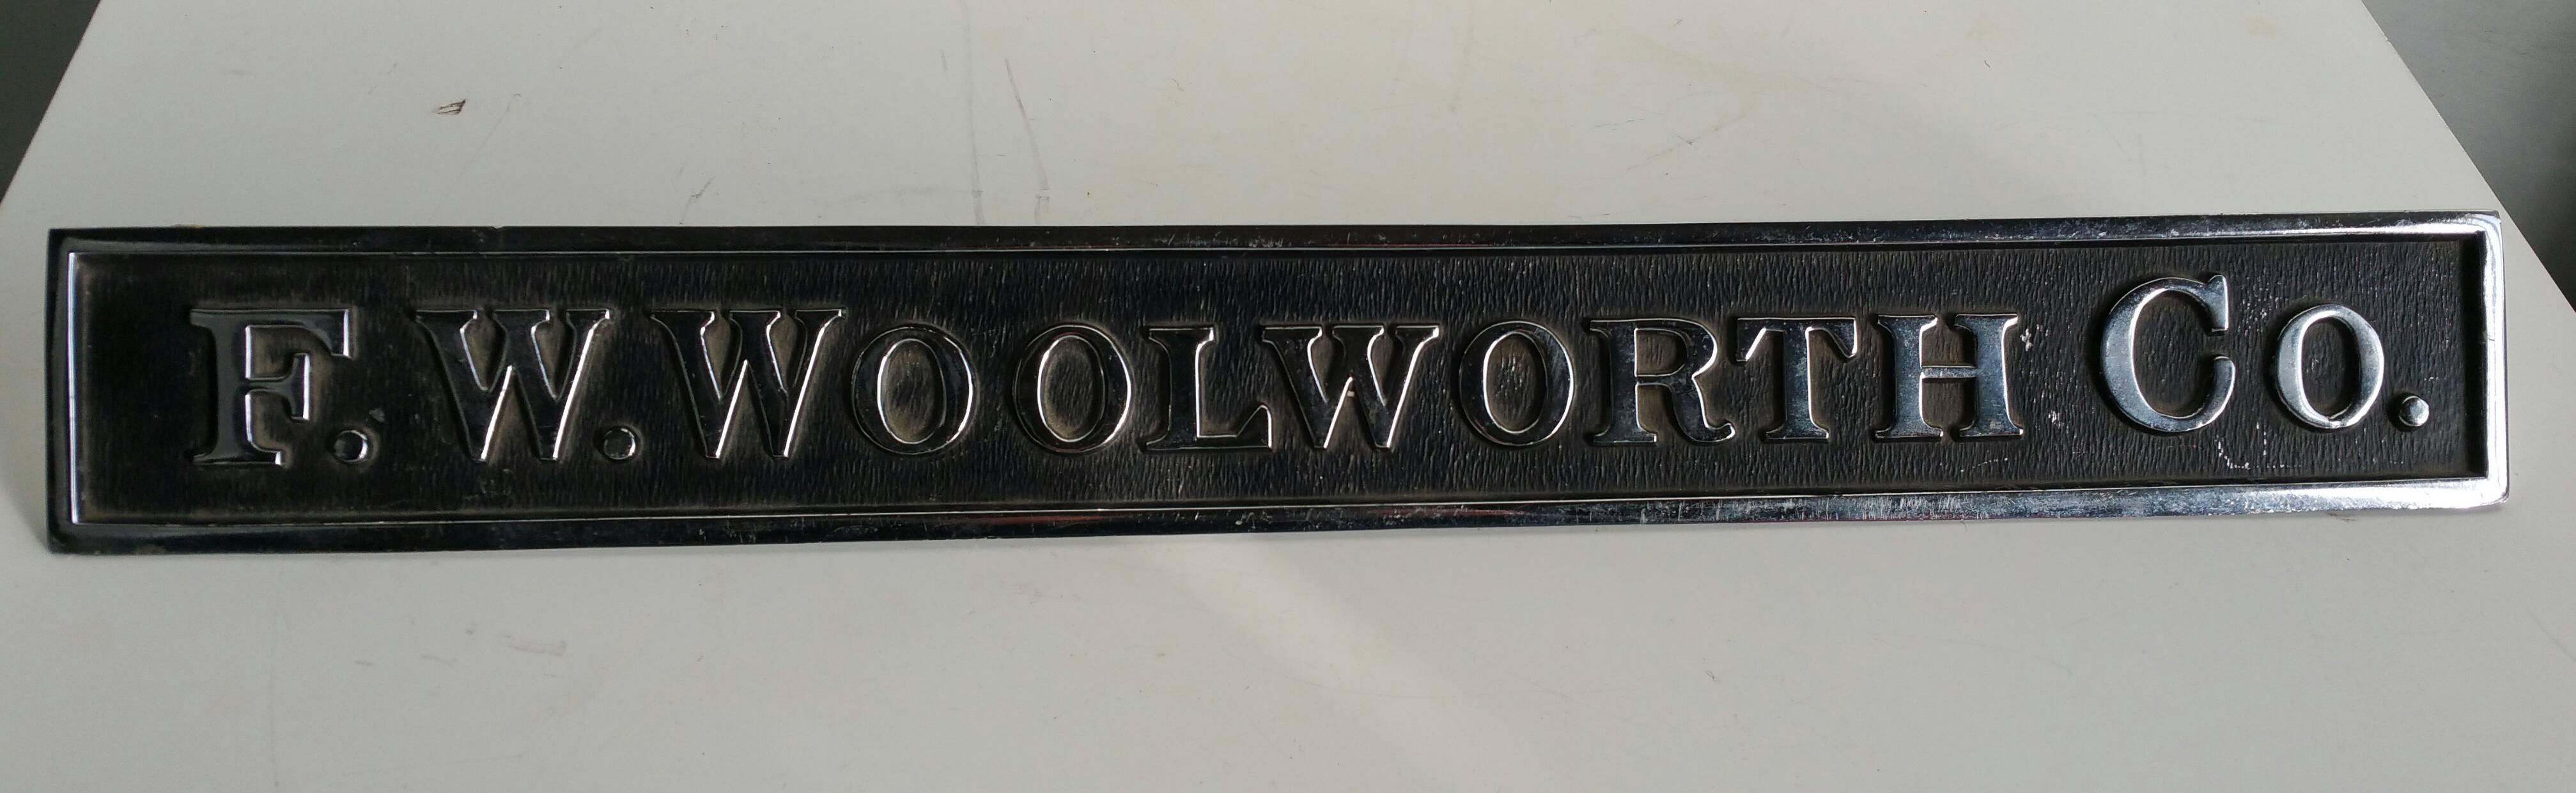 Great little decorative item,, Period F.W.WOOLWORTH CO. counter sign made by NU-LITE DISPLAYS.. Nickel plated steel and painted..